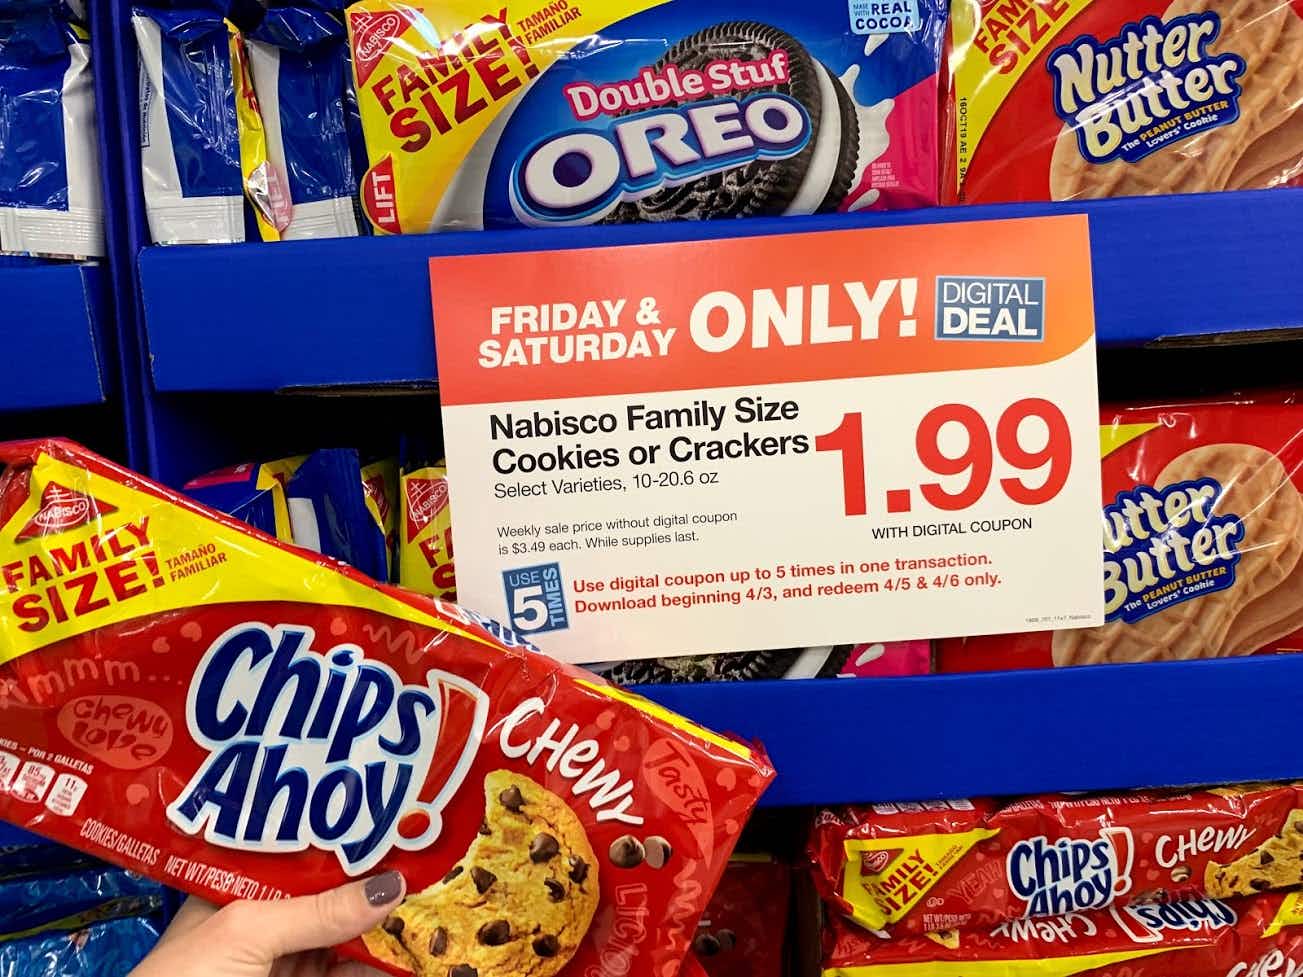 Watch for 2-Day sales at Kroger and stock up as much as the sale allows.